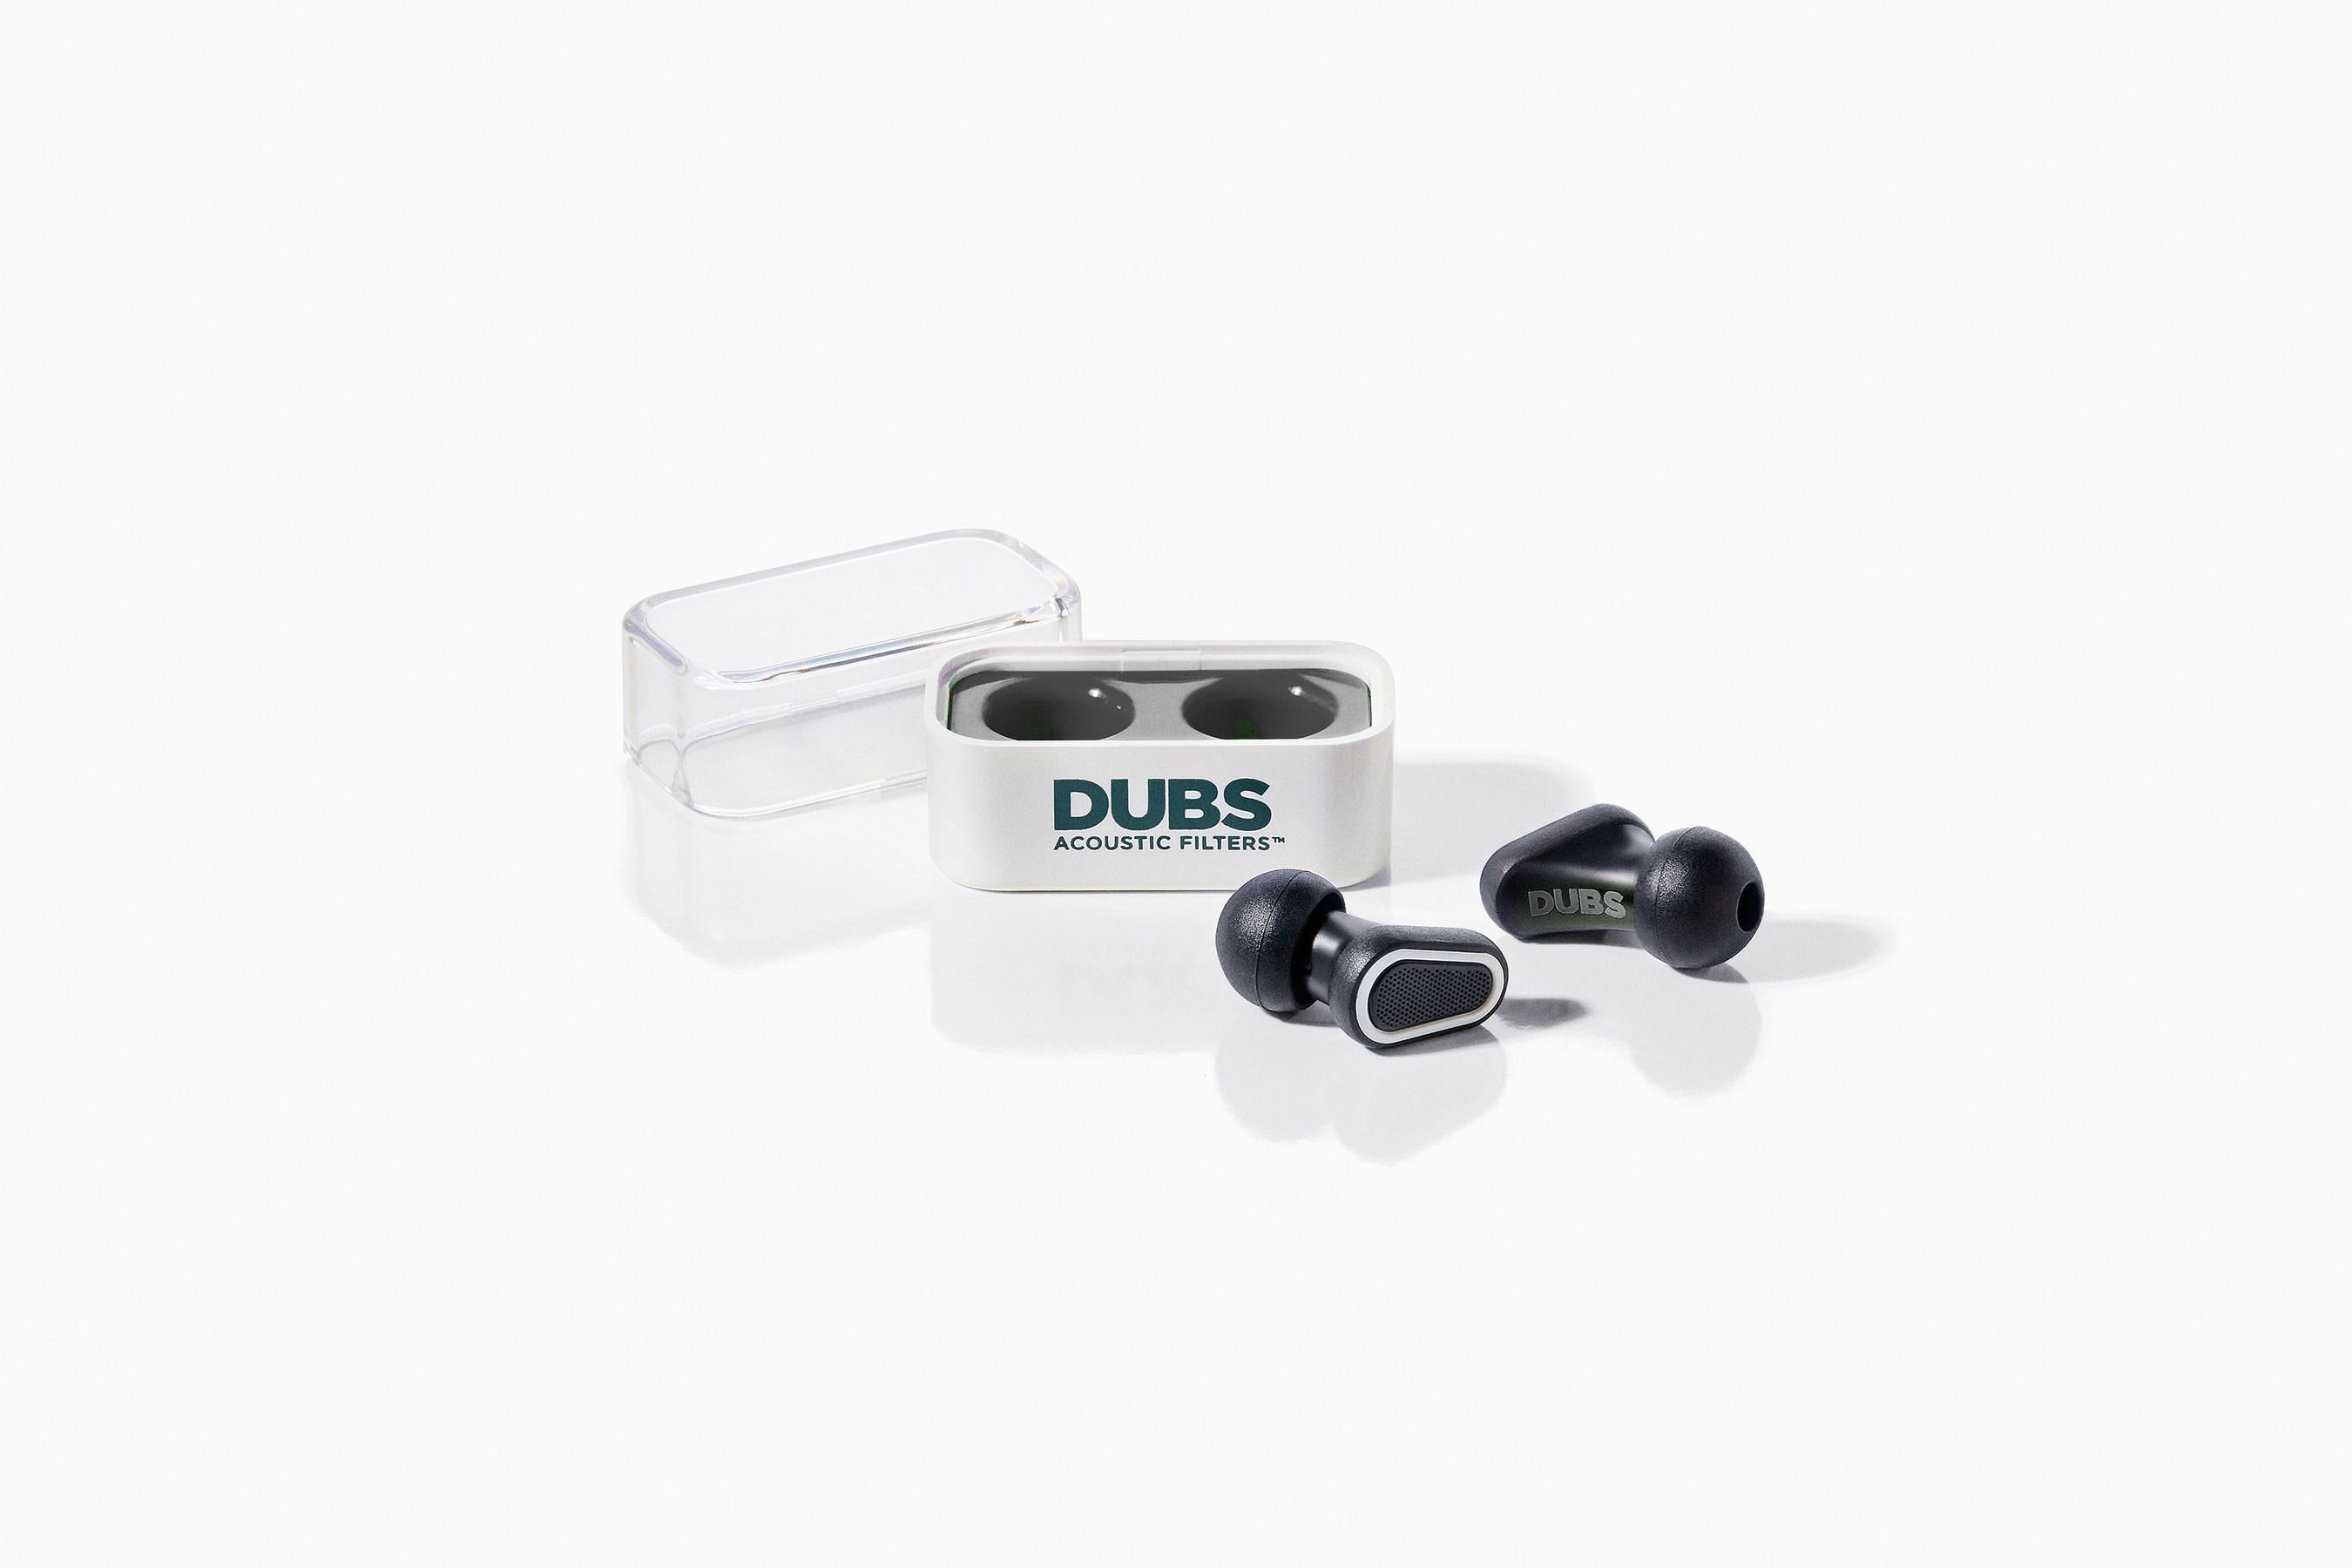 DUBS Acoustic Filters by Doppler Labs